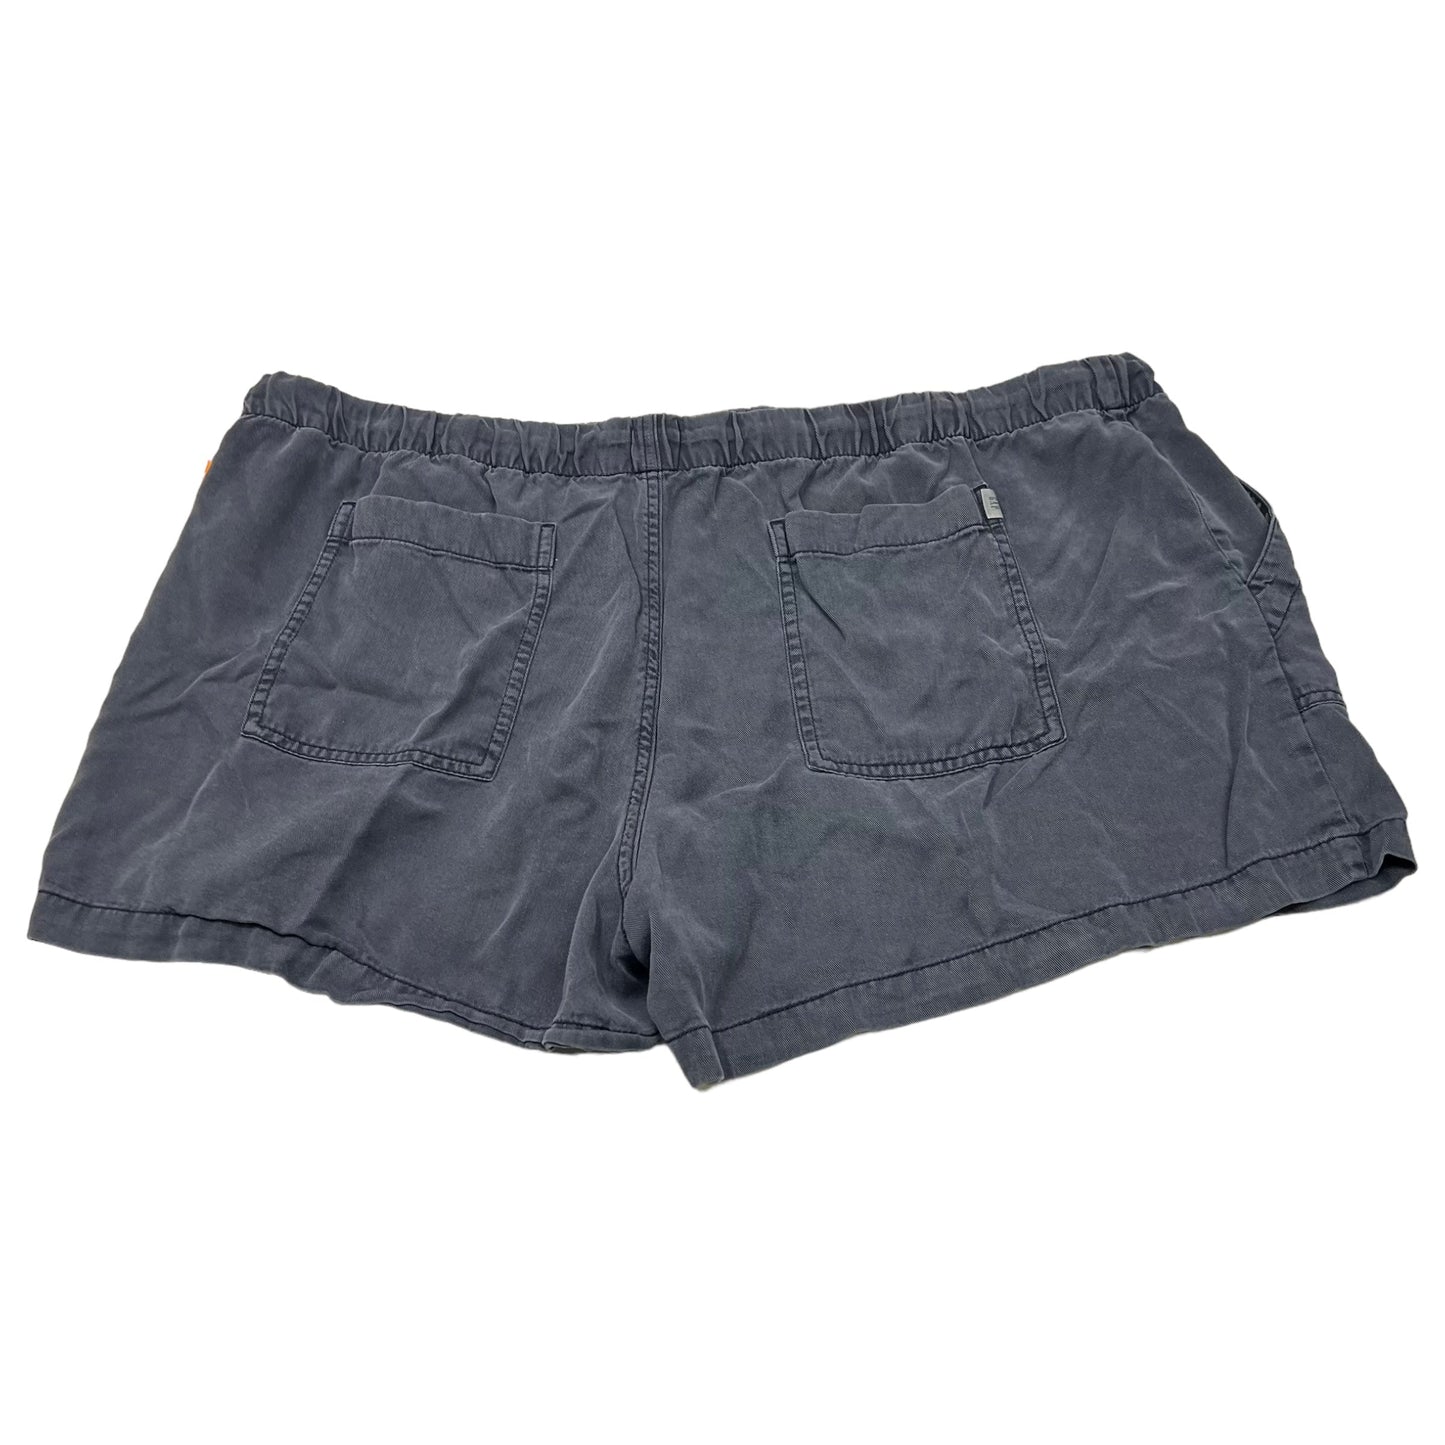 Shorts By Gap  Size: 20